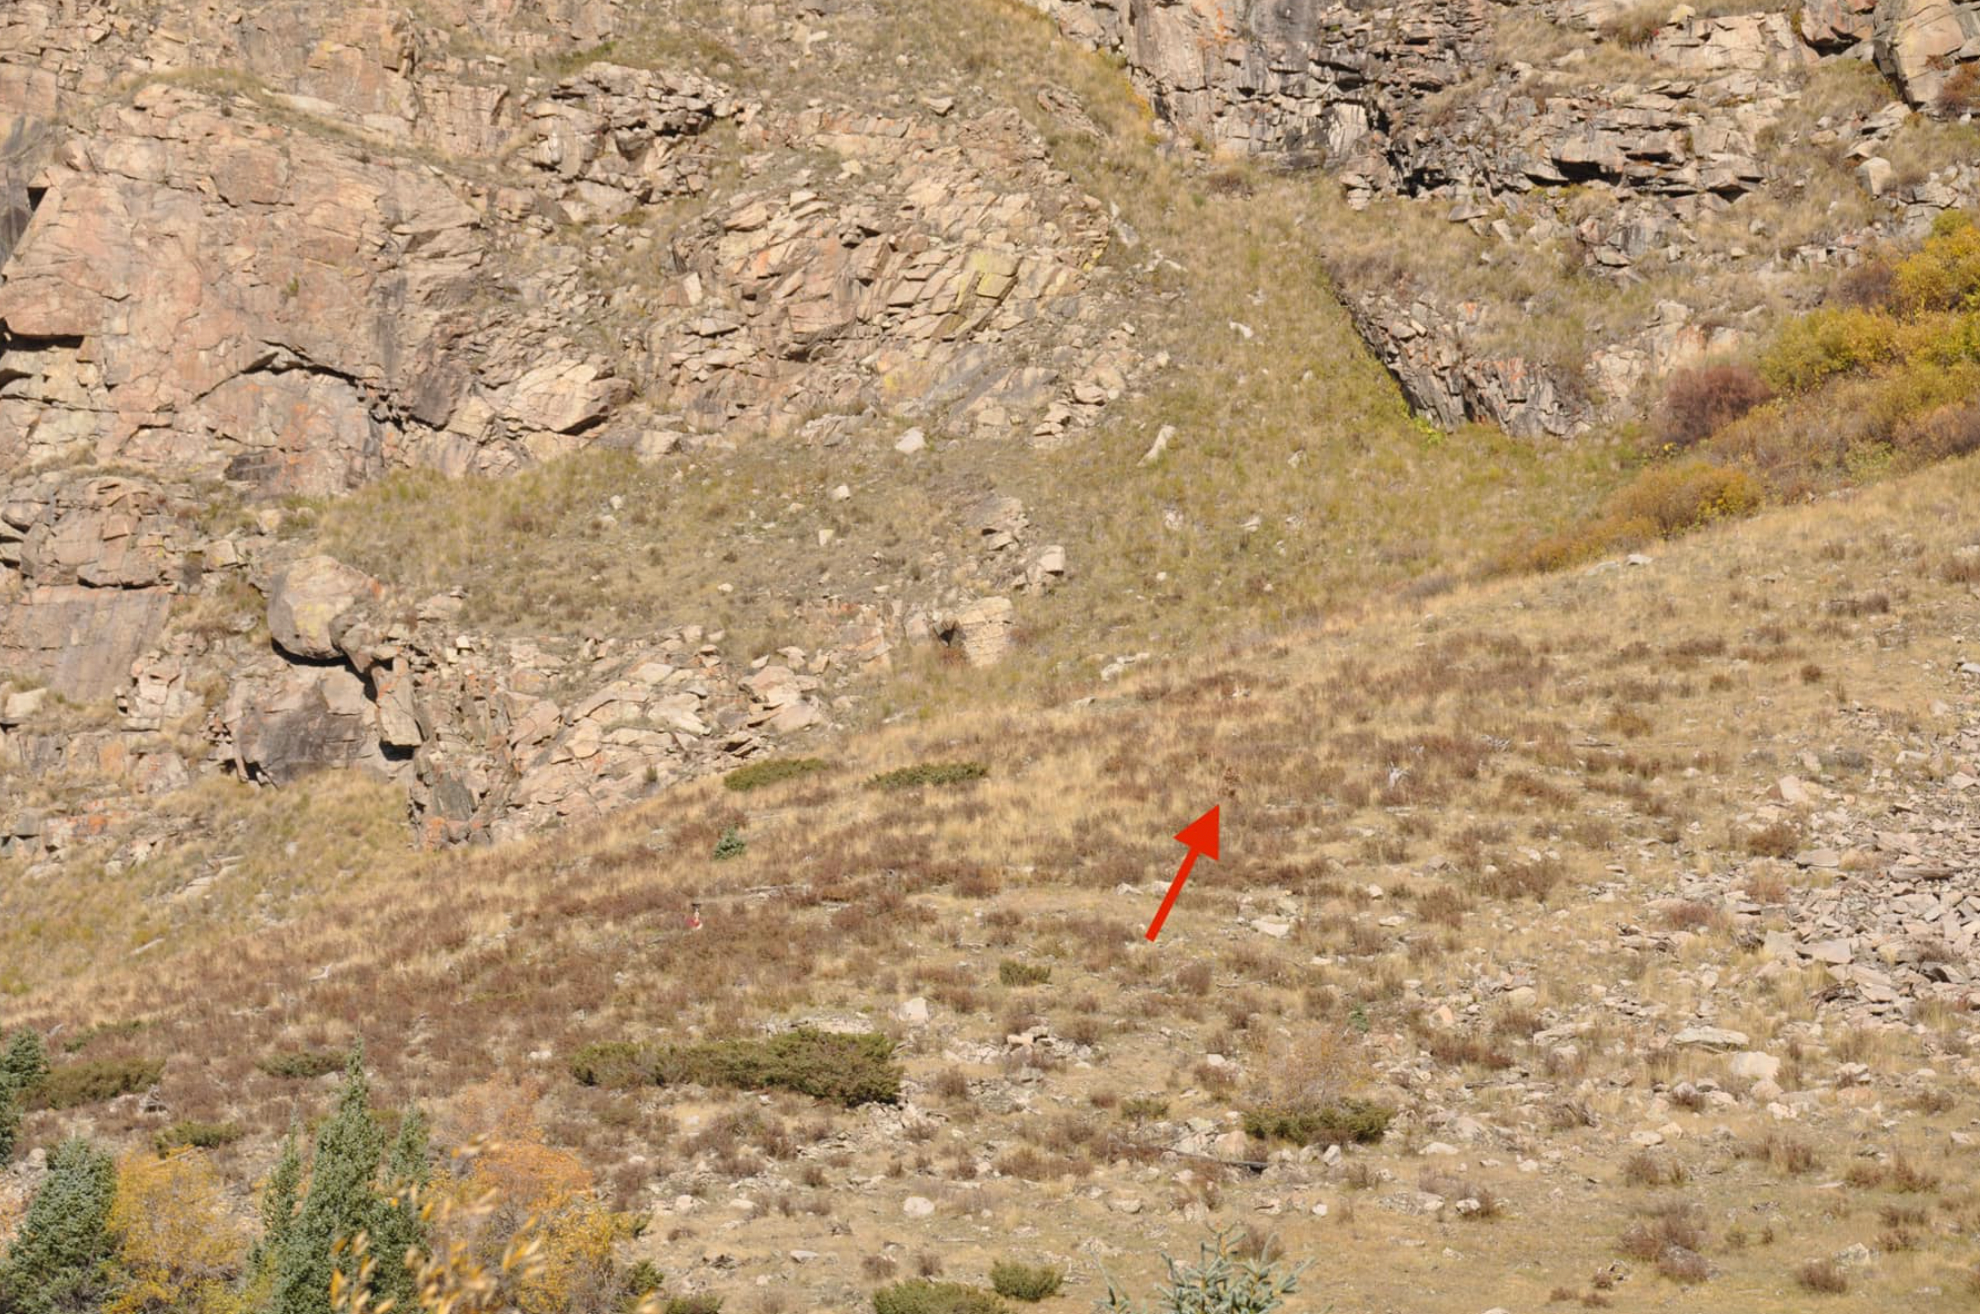 New photos of Bigfoot? Woman records something mysterious in Colorado